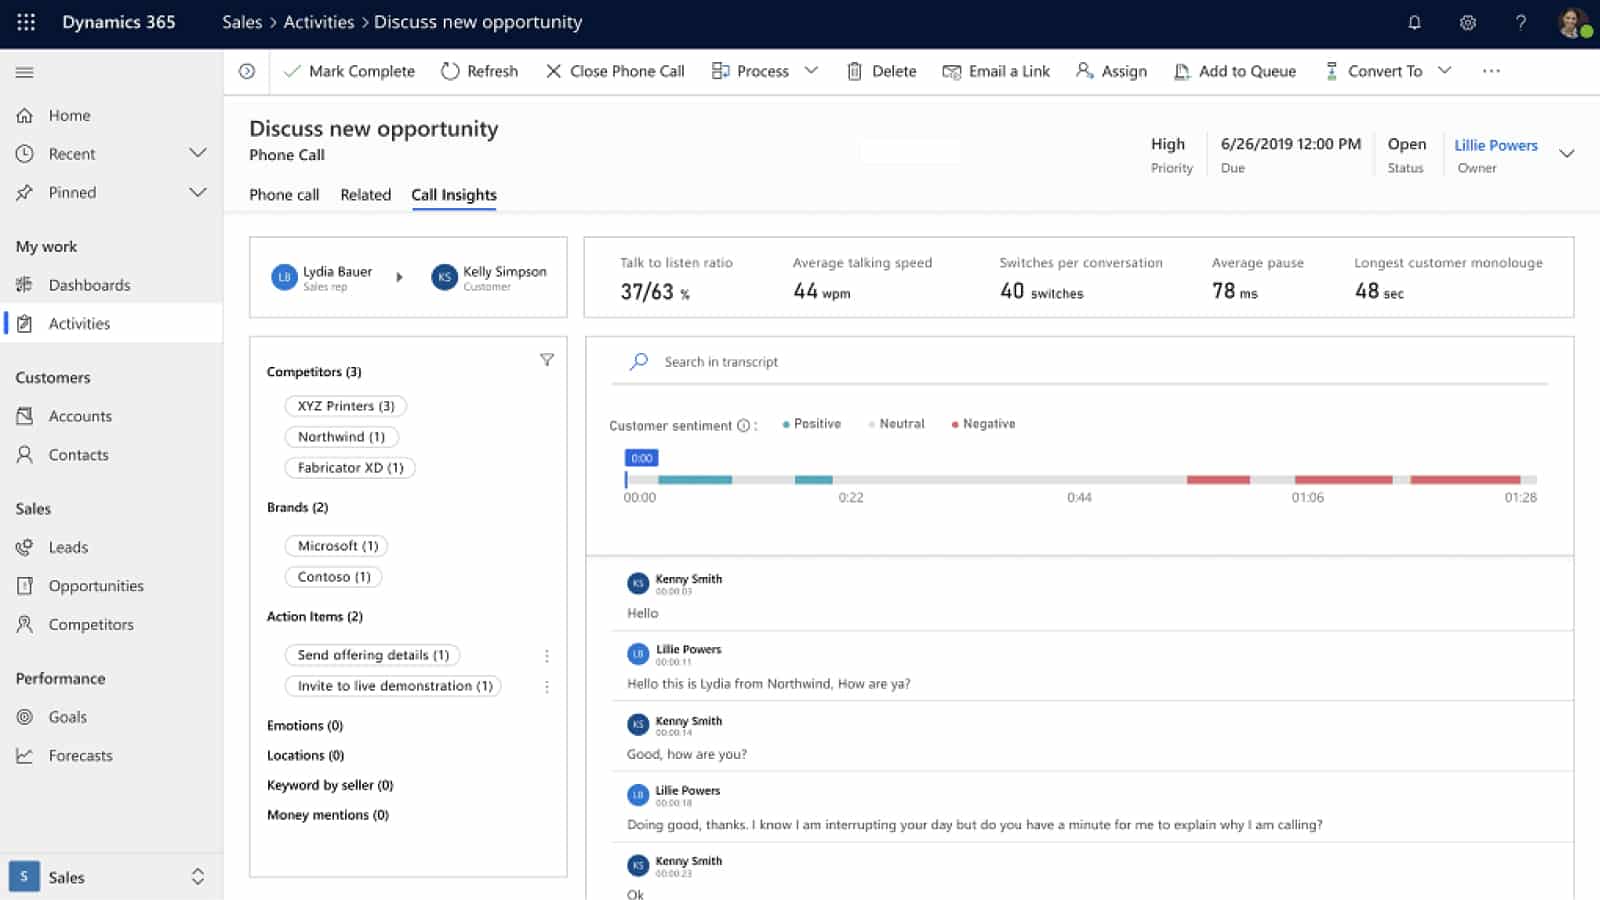 Call Insights page from Microsoft Dynamics 365.